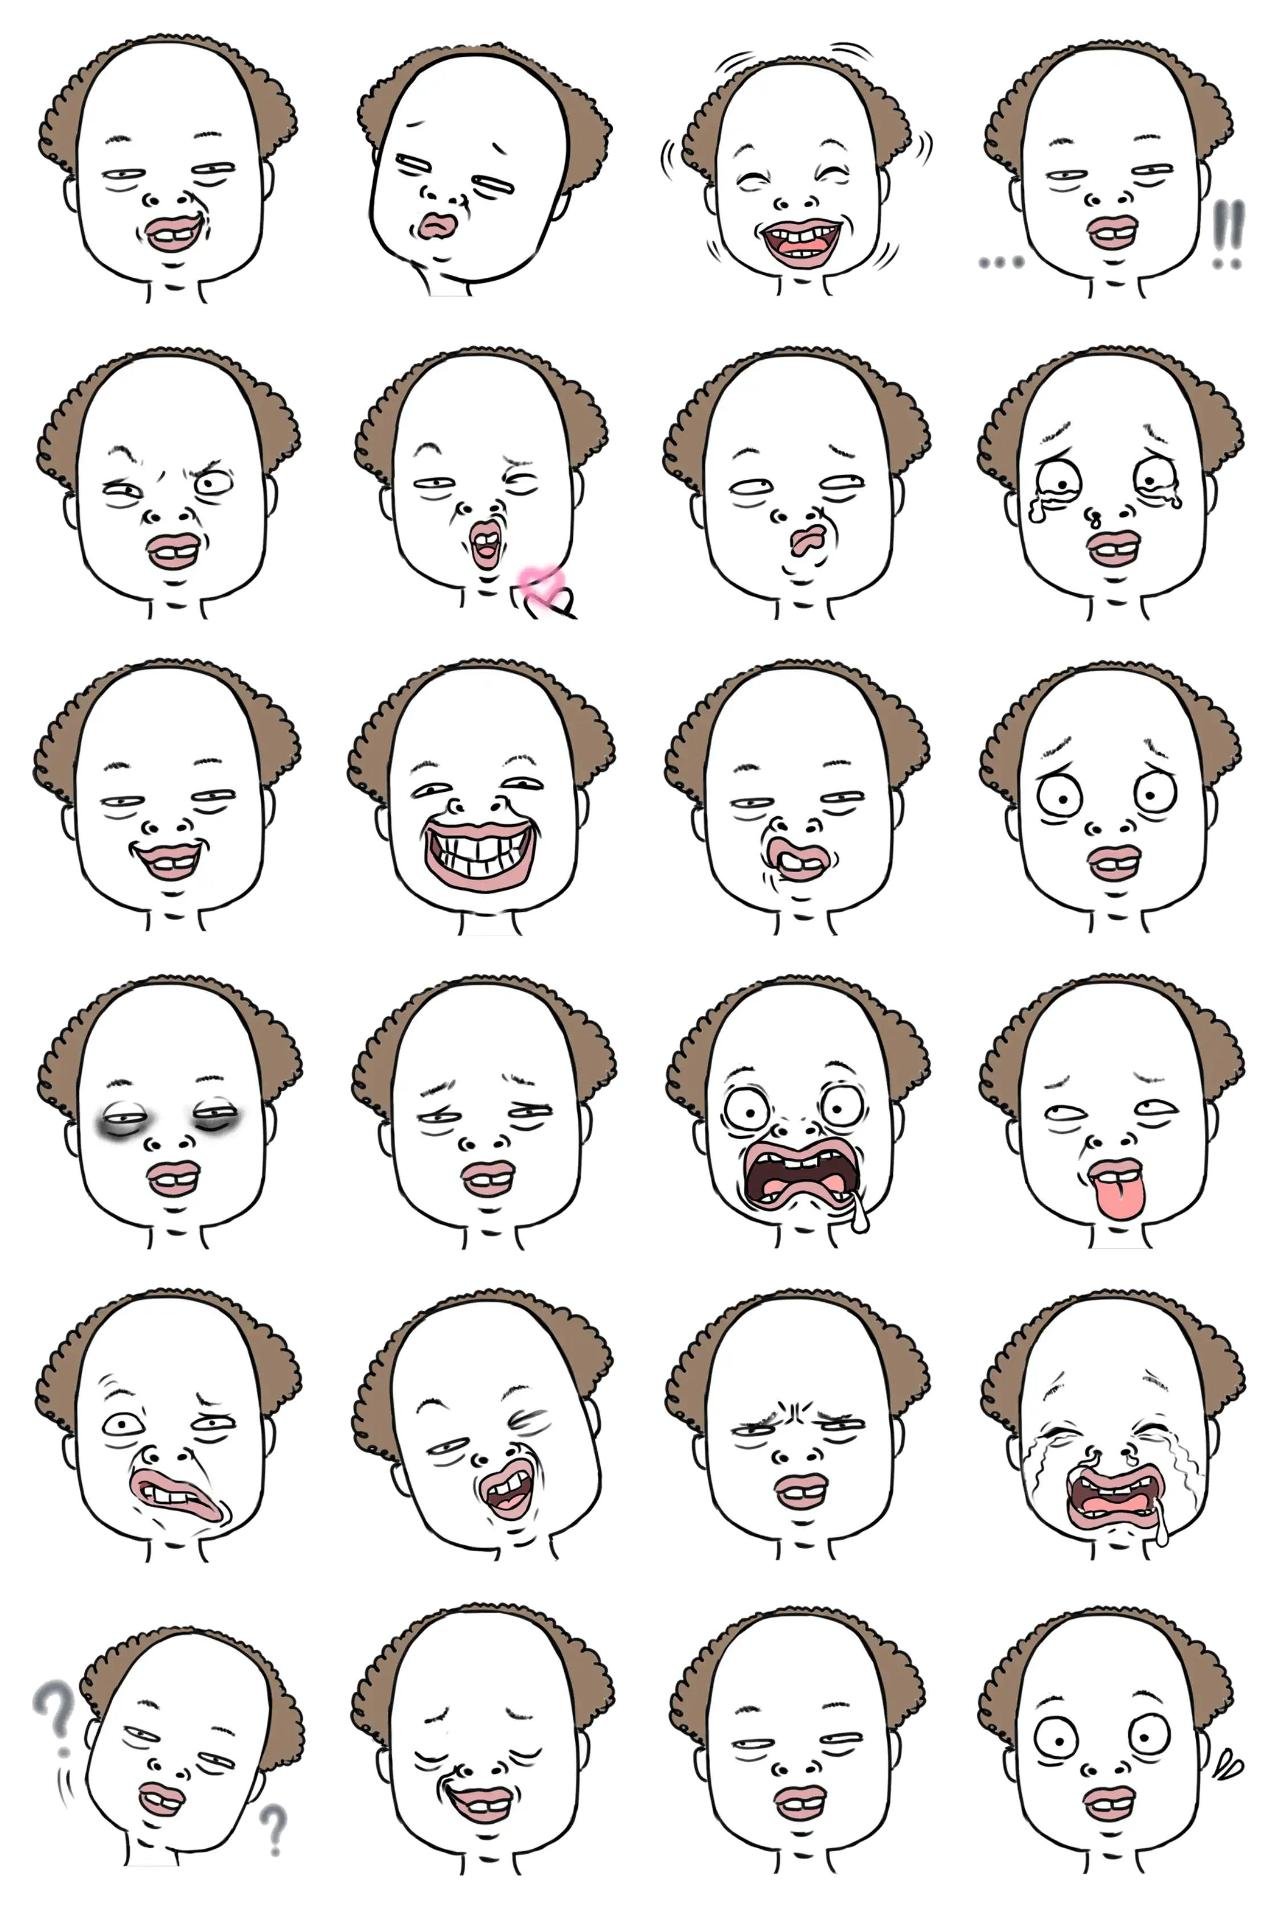 Cynical man Jun People sticker pack for Whatsapp, Telegram, Signal, and others chatting and message apps